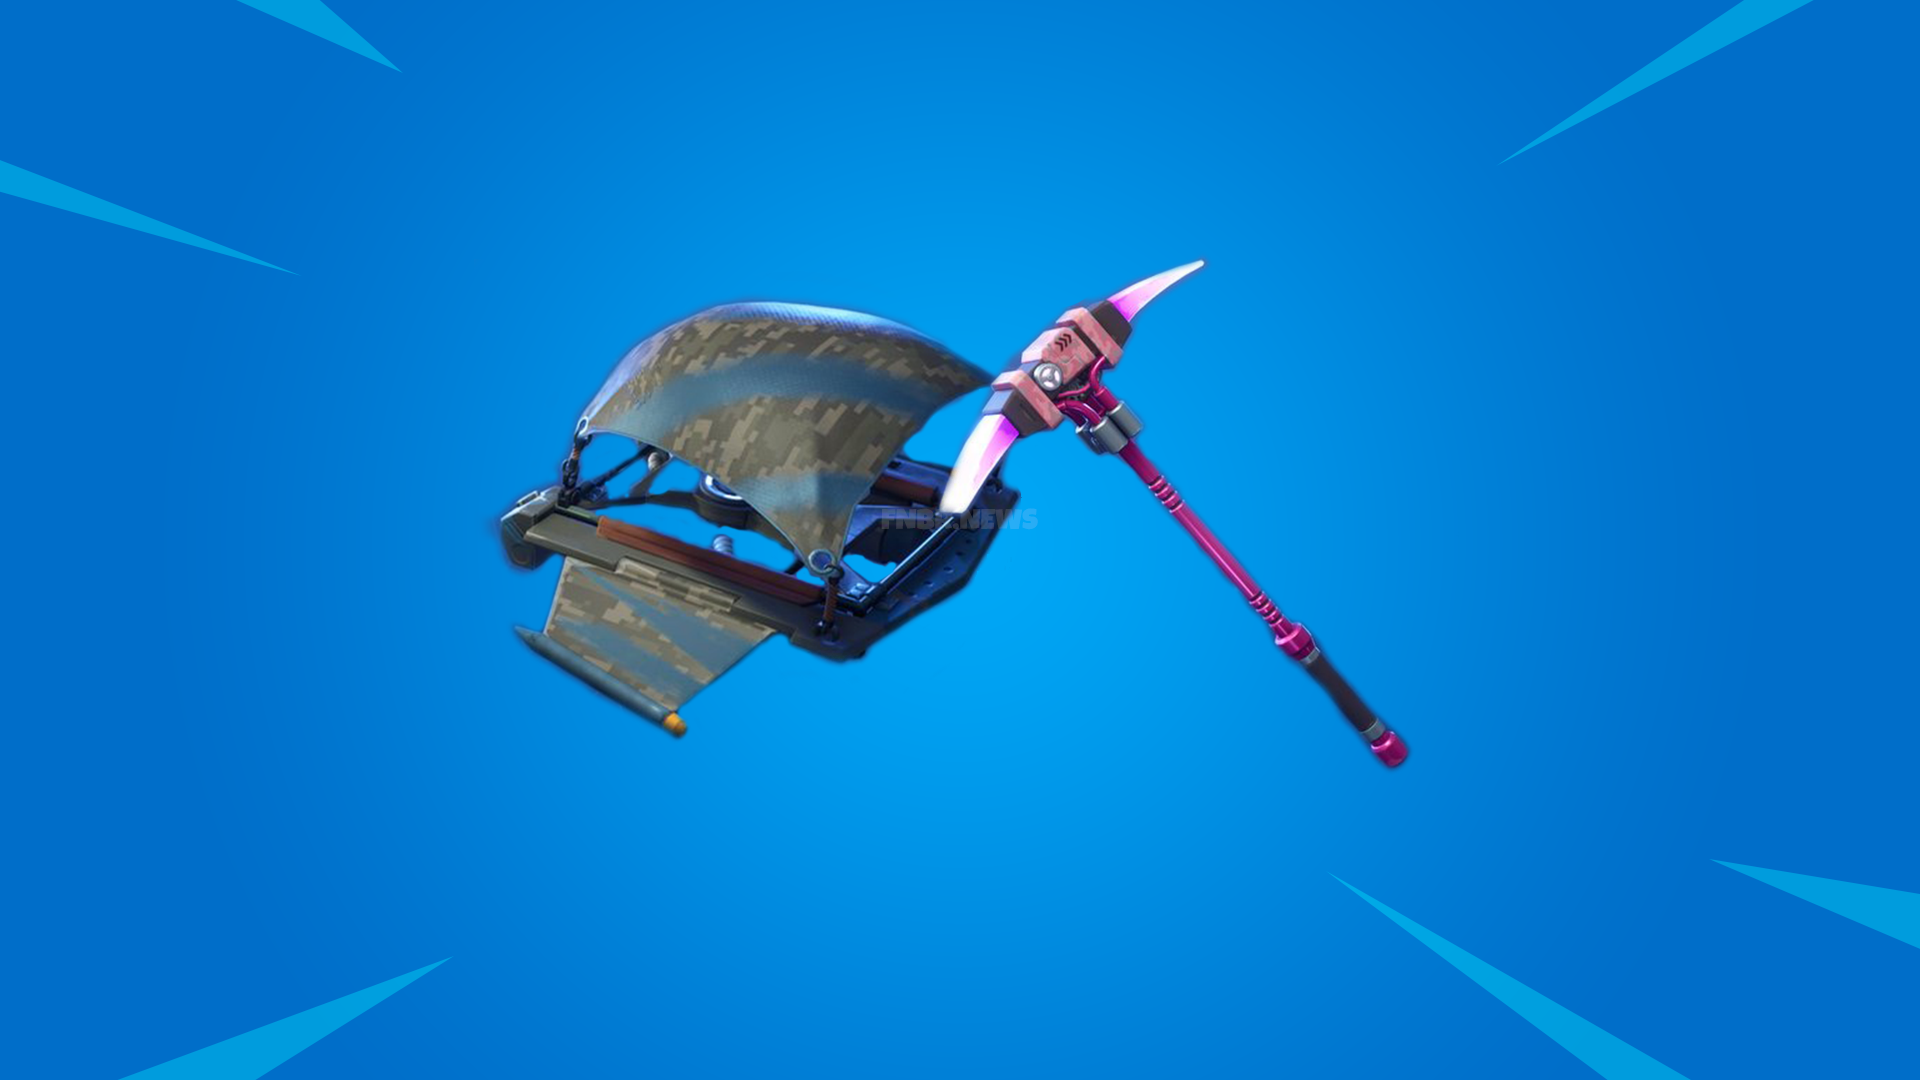 Leak More Battle Royale Rewards For Save The World Founders Coming To Fortnite Fortnite News